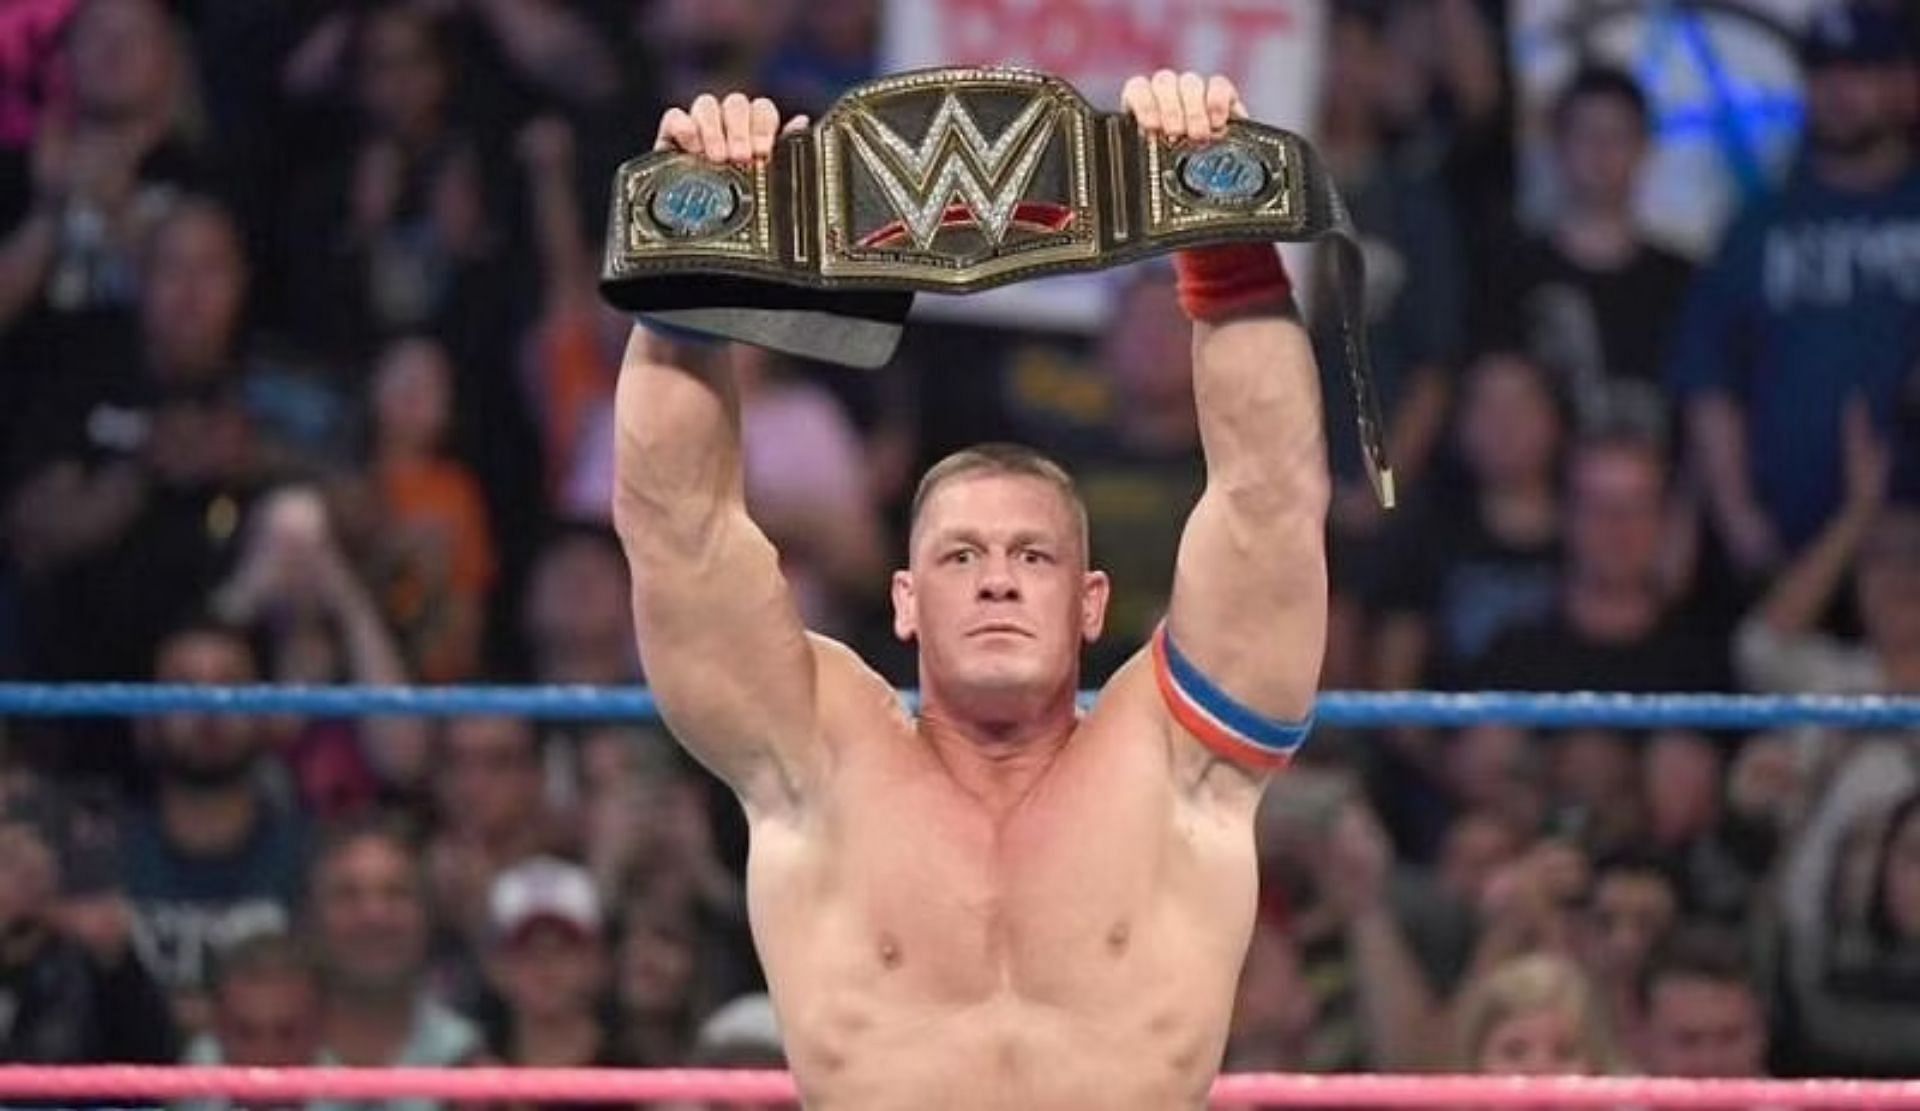 one-of-the-biggest-crimes-in-the-history-of-professional-wrestling-and-nbsp-retired-wwe-star-reflects-on-his-career-defining-loss-to-john-cena